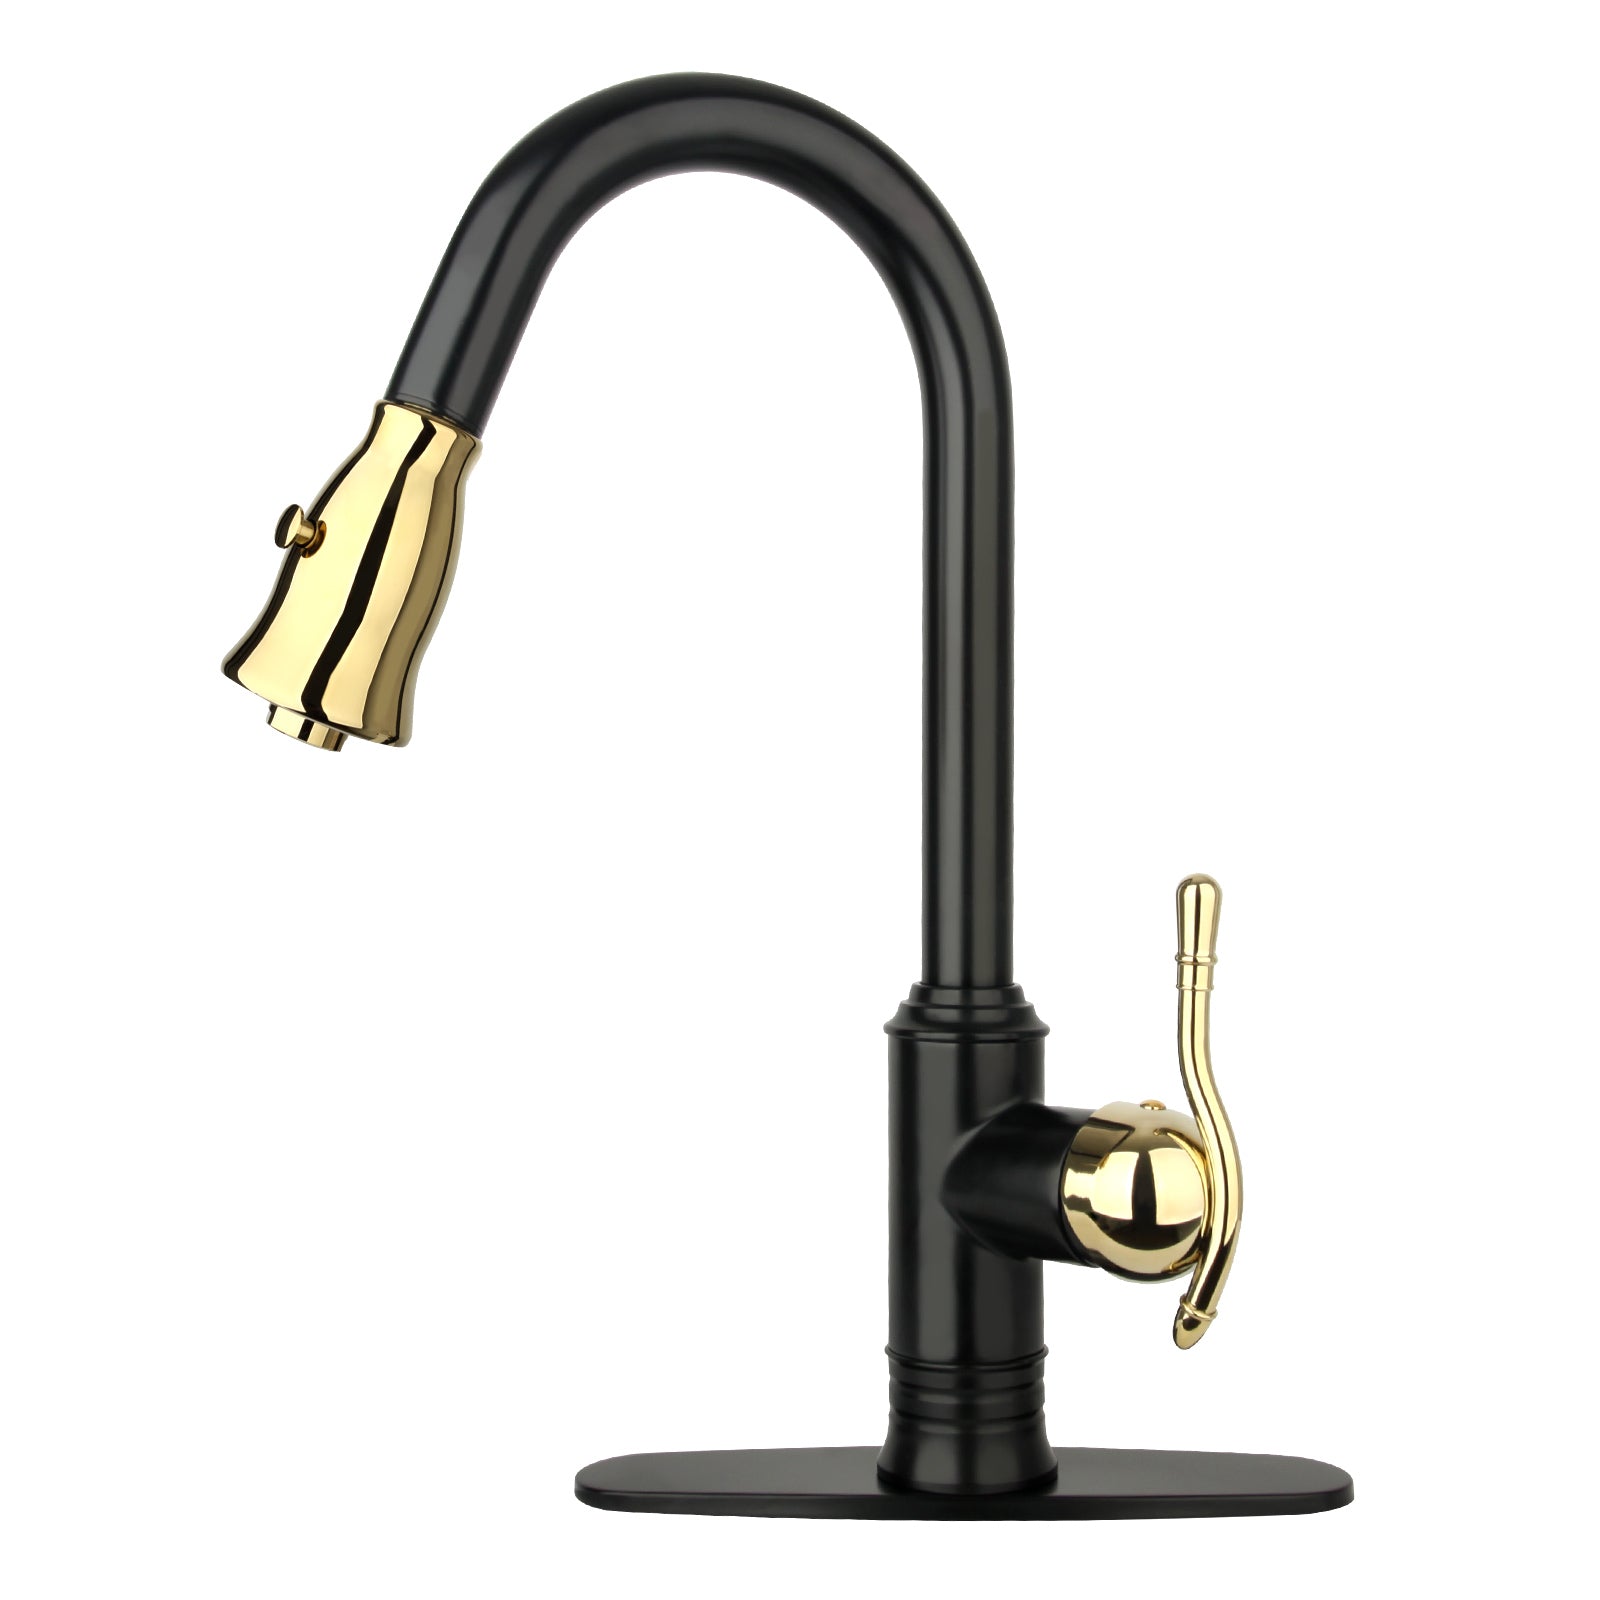 Two-Tone Matte Black & Gold Pull Out Kitchen Faucet with Deck Plate, Single Level Solid Brass Kitchen Sink Faucets with Pull Down Sprayer - AK415BLZG